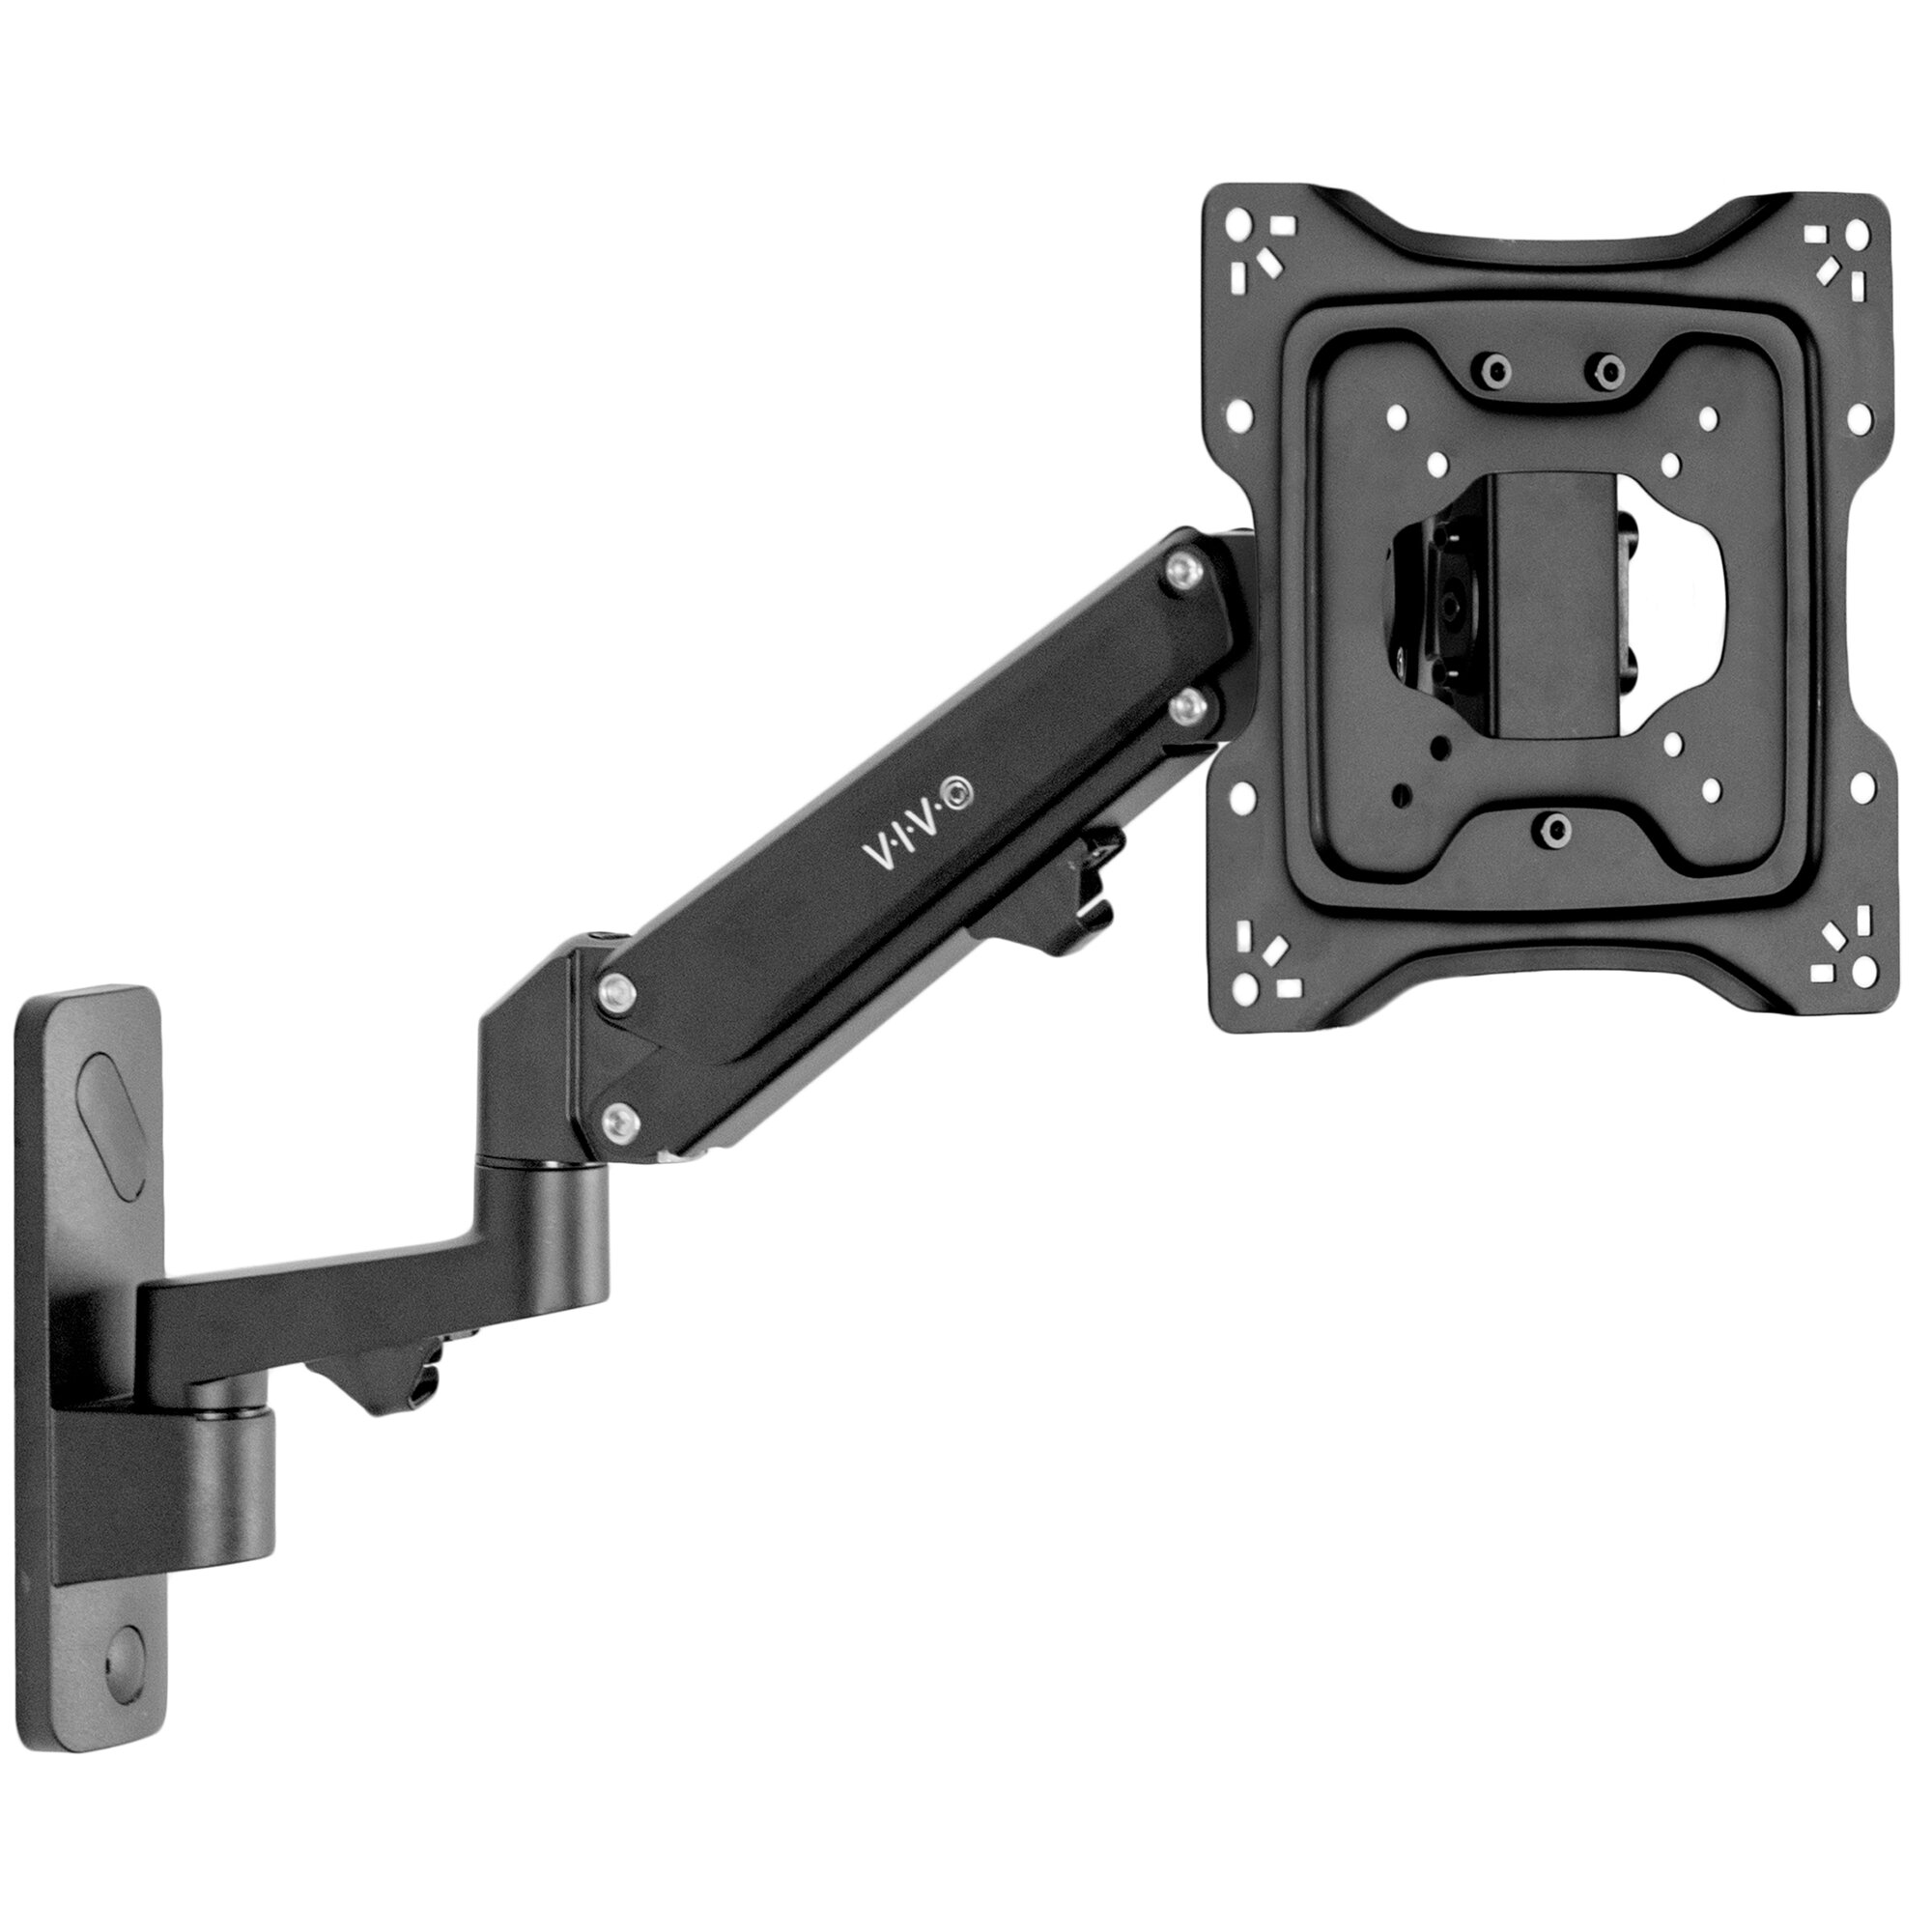 VIVO Recessed Mechanical Spring 65 to 70 inch TV Wall Mount for